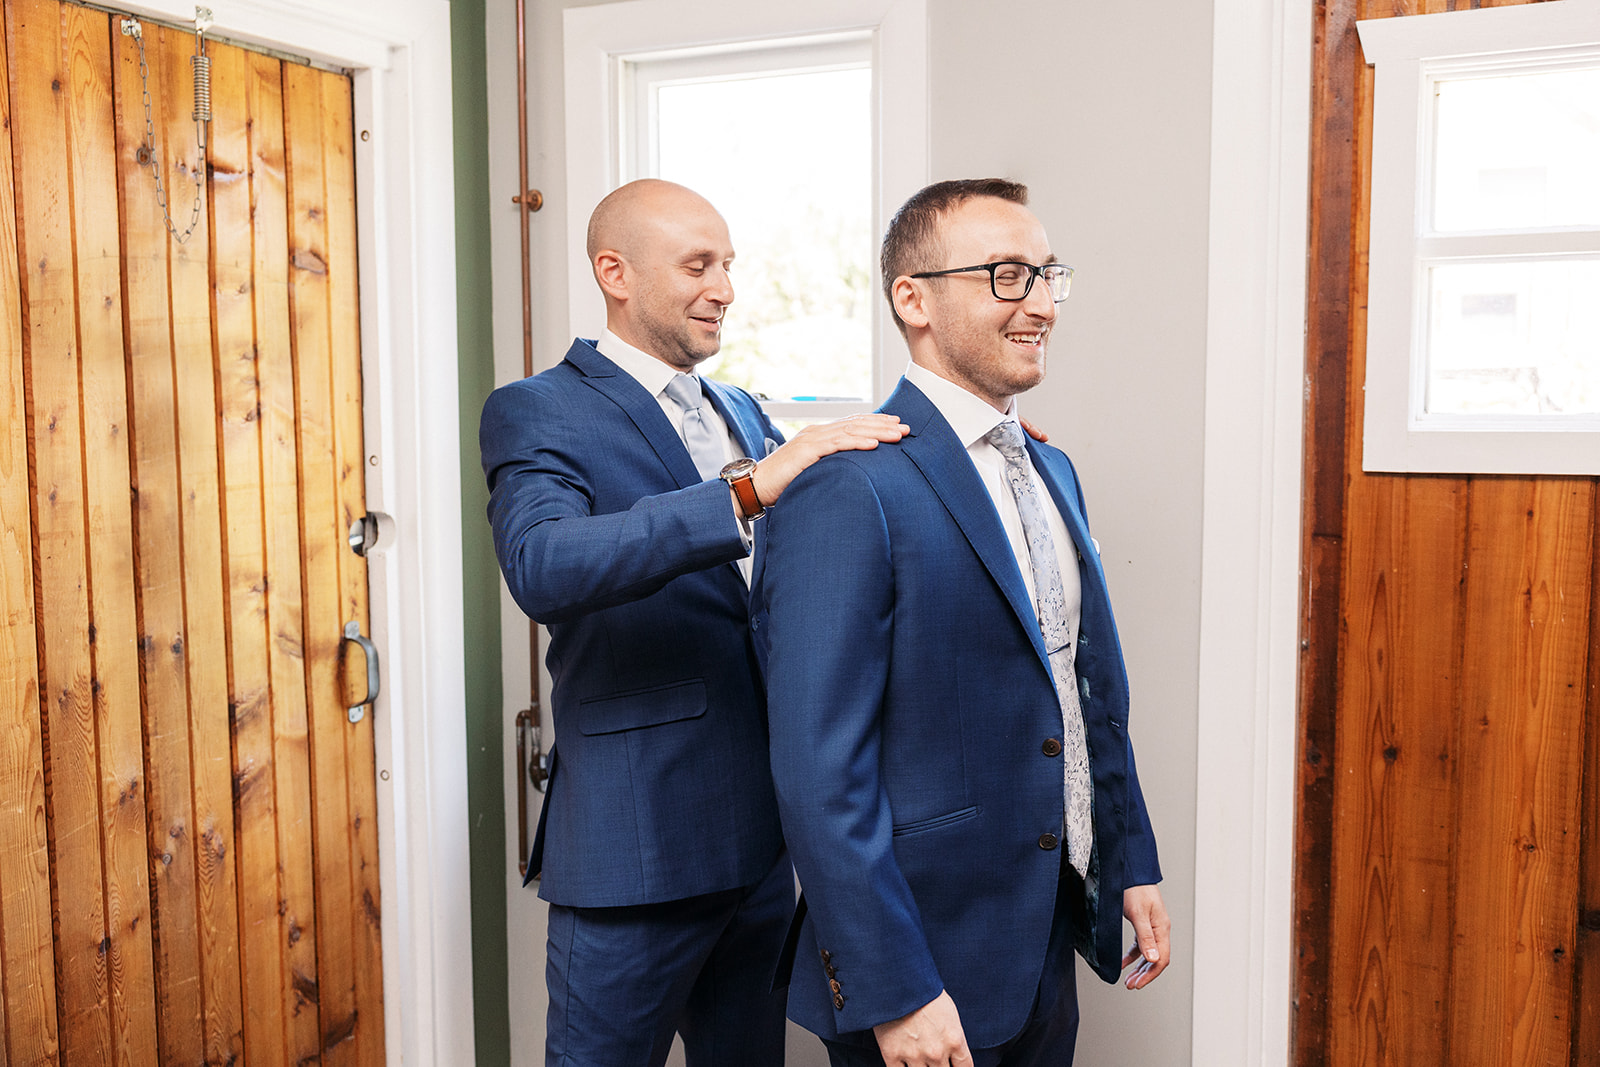 A groomsmen dusts off the shoulders of the groom in blue suits while getting ready for his wedding